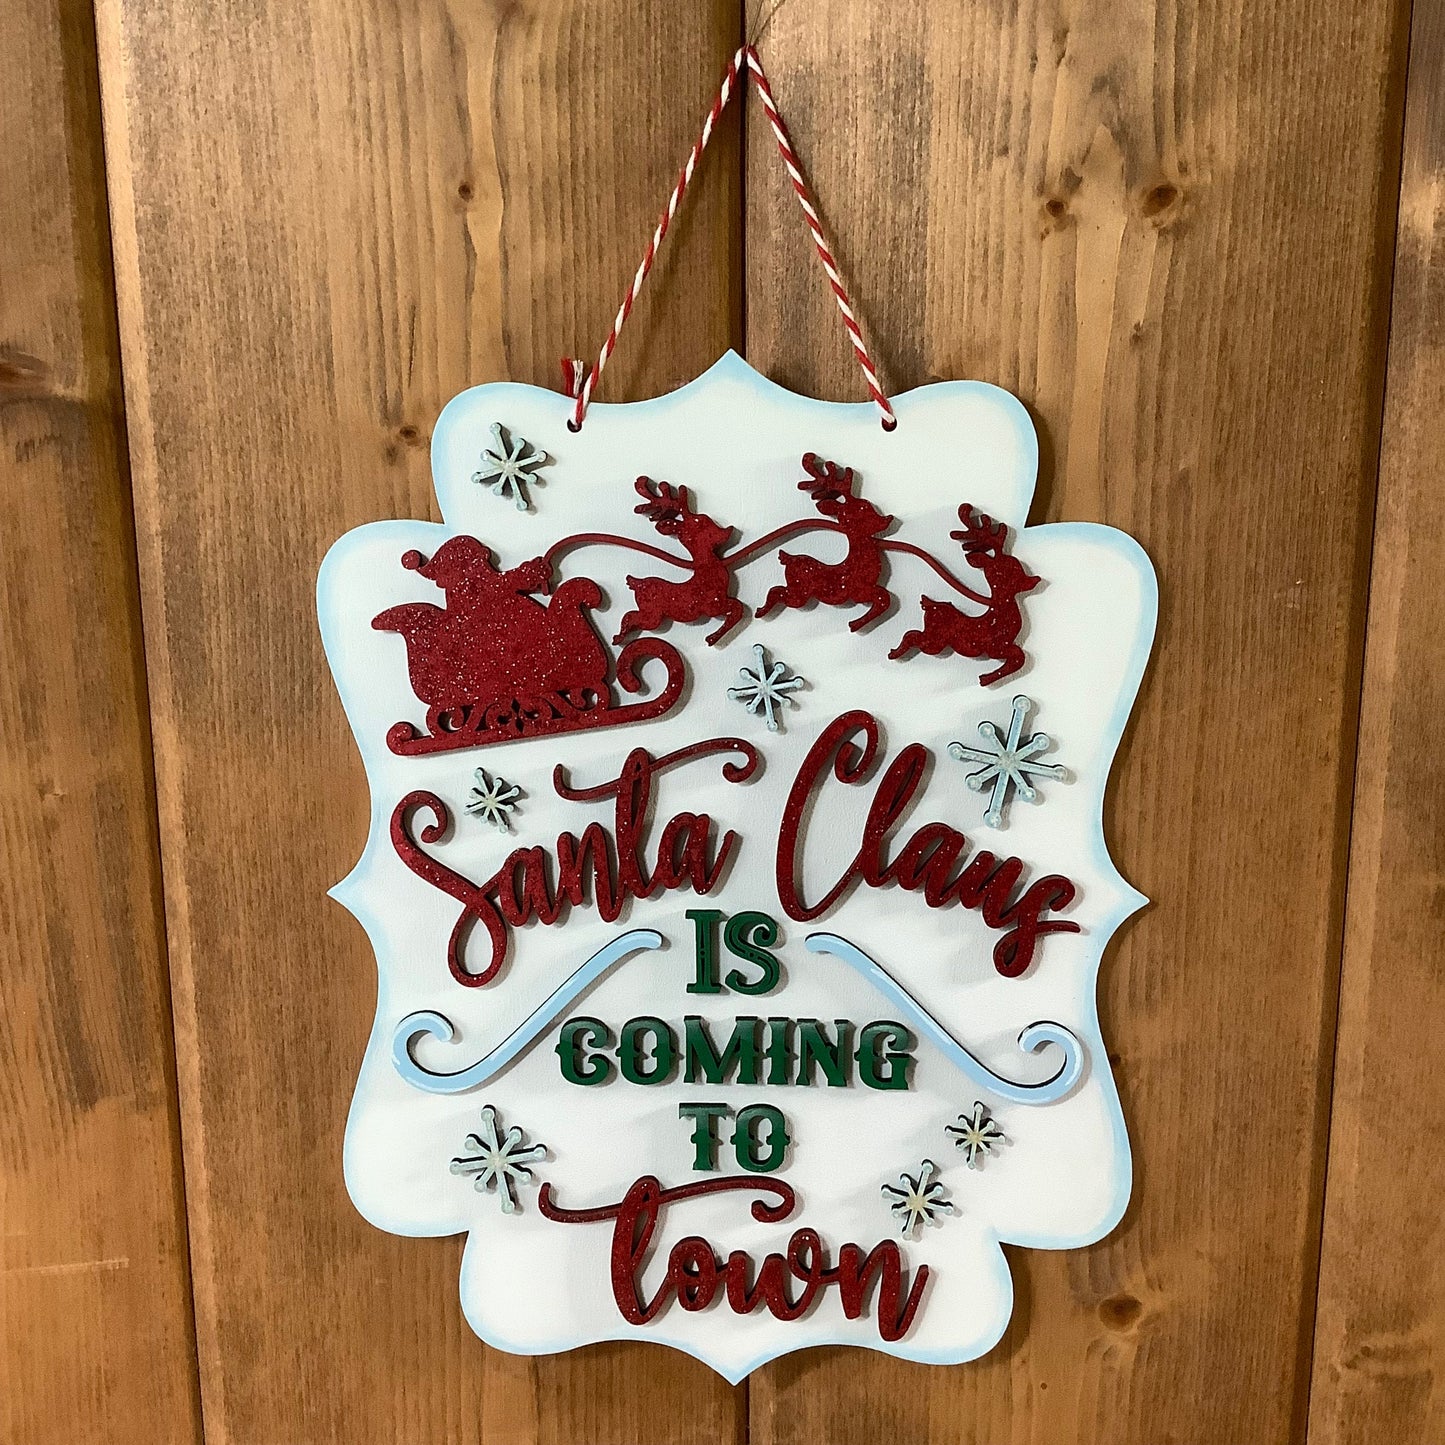 Santa Is Coming To Town Adorable Hand Painted Laser Cut Wood Christmas Sign, Red Glitter Painted Santa, Sleigh, Reindeer, Snowflakes, Green